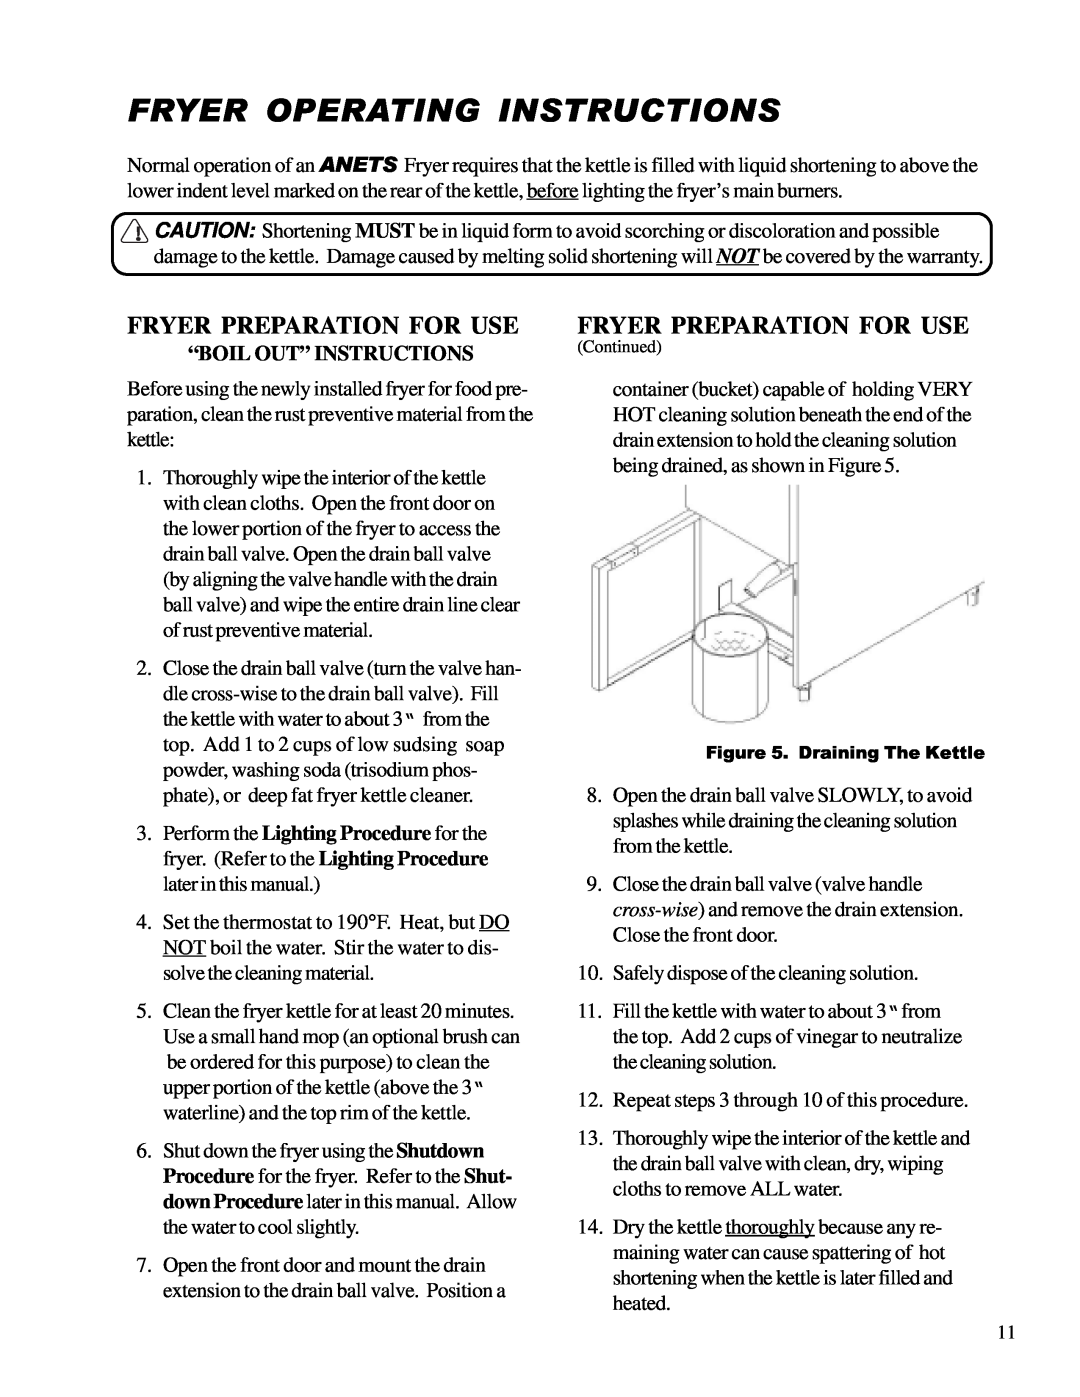 Anetsberger Brothers 14VFS warranty Fryer Operating Instructions, Fryer Preparation For Use, “Boil Out” Instructions 